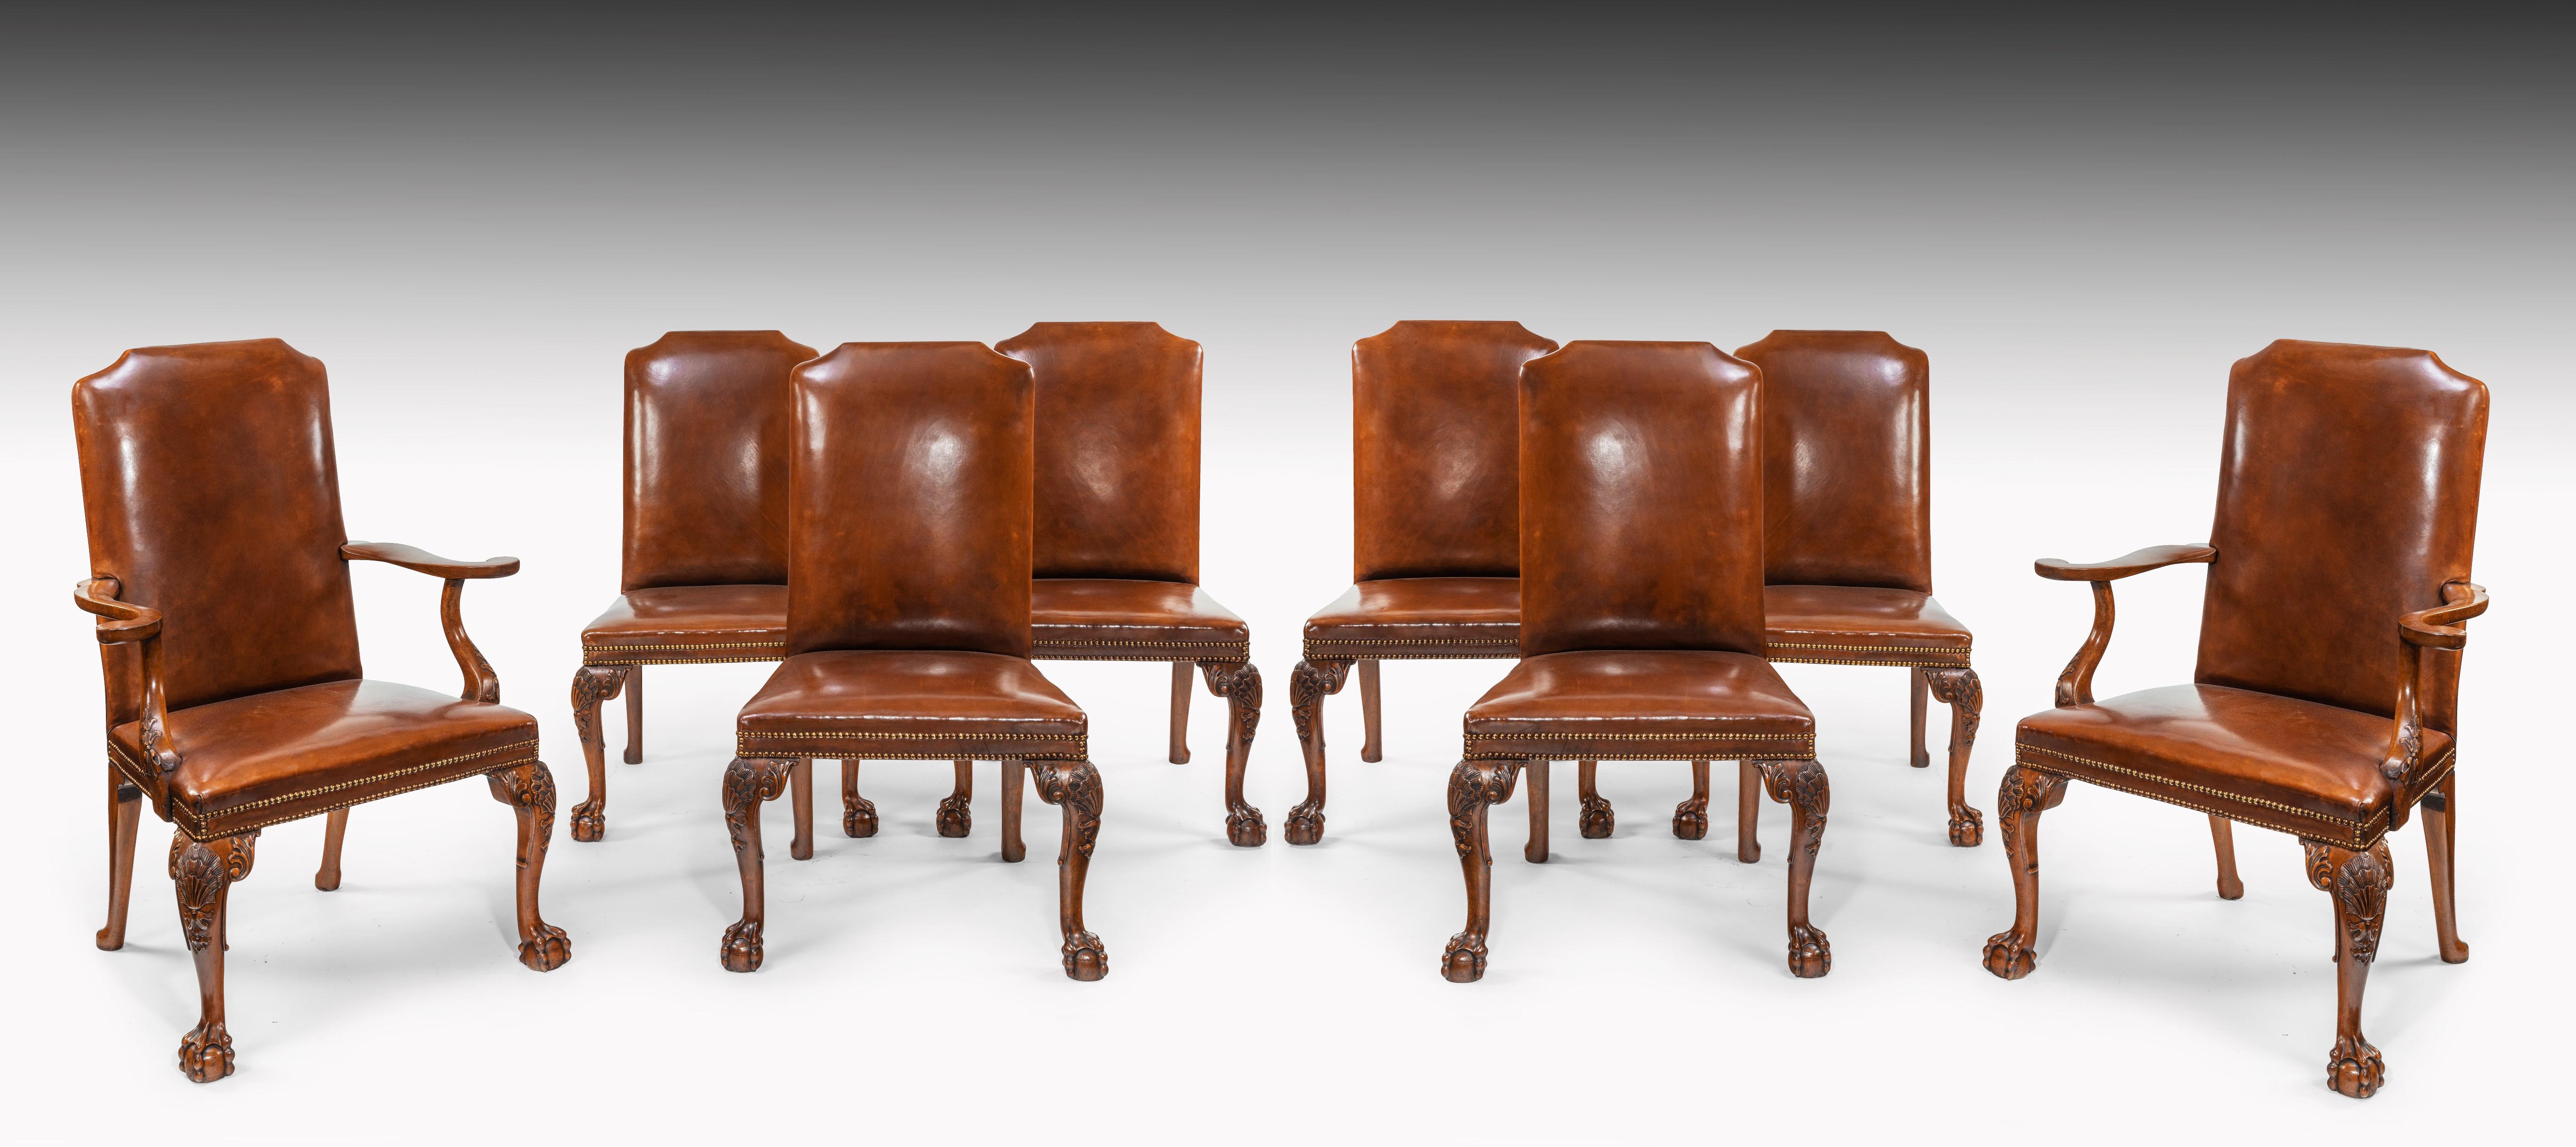 Hand-Carved Fine Set of Eight Walnut and Leather Cabriole Leg Dining Chairs Queen Anne Style